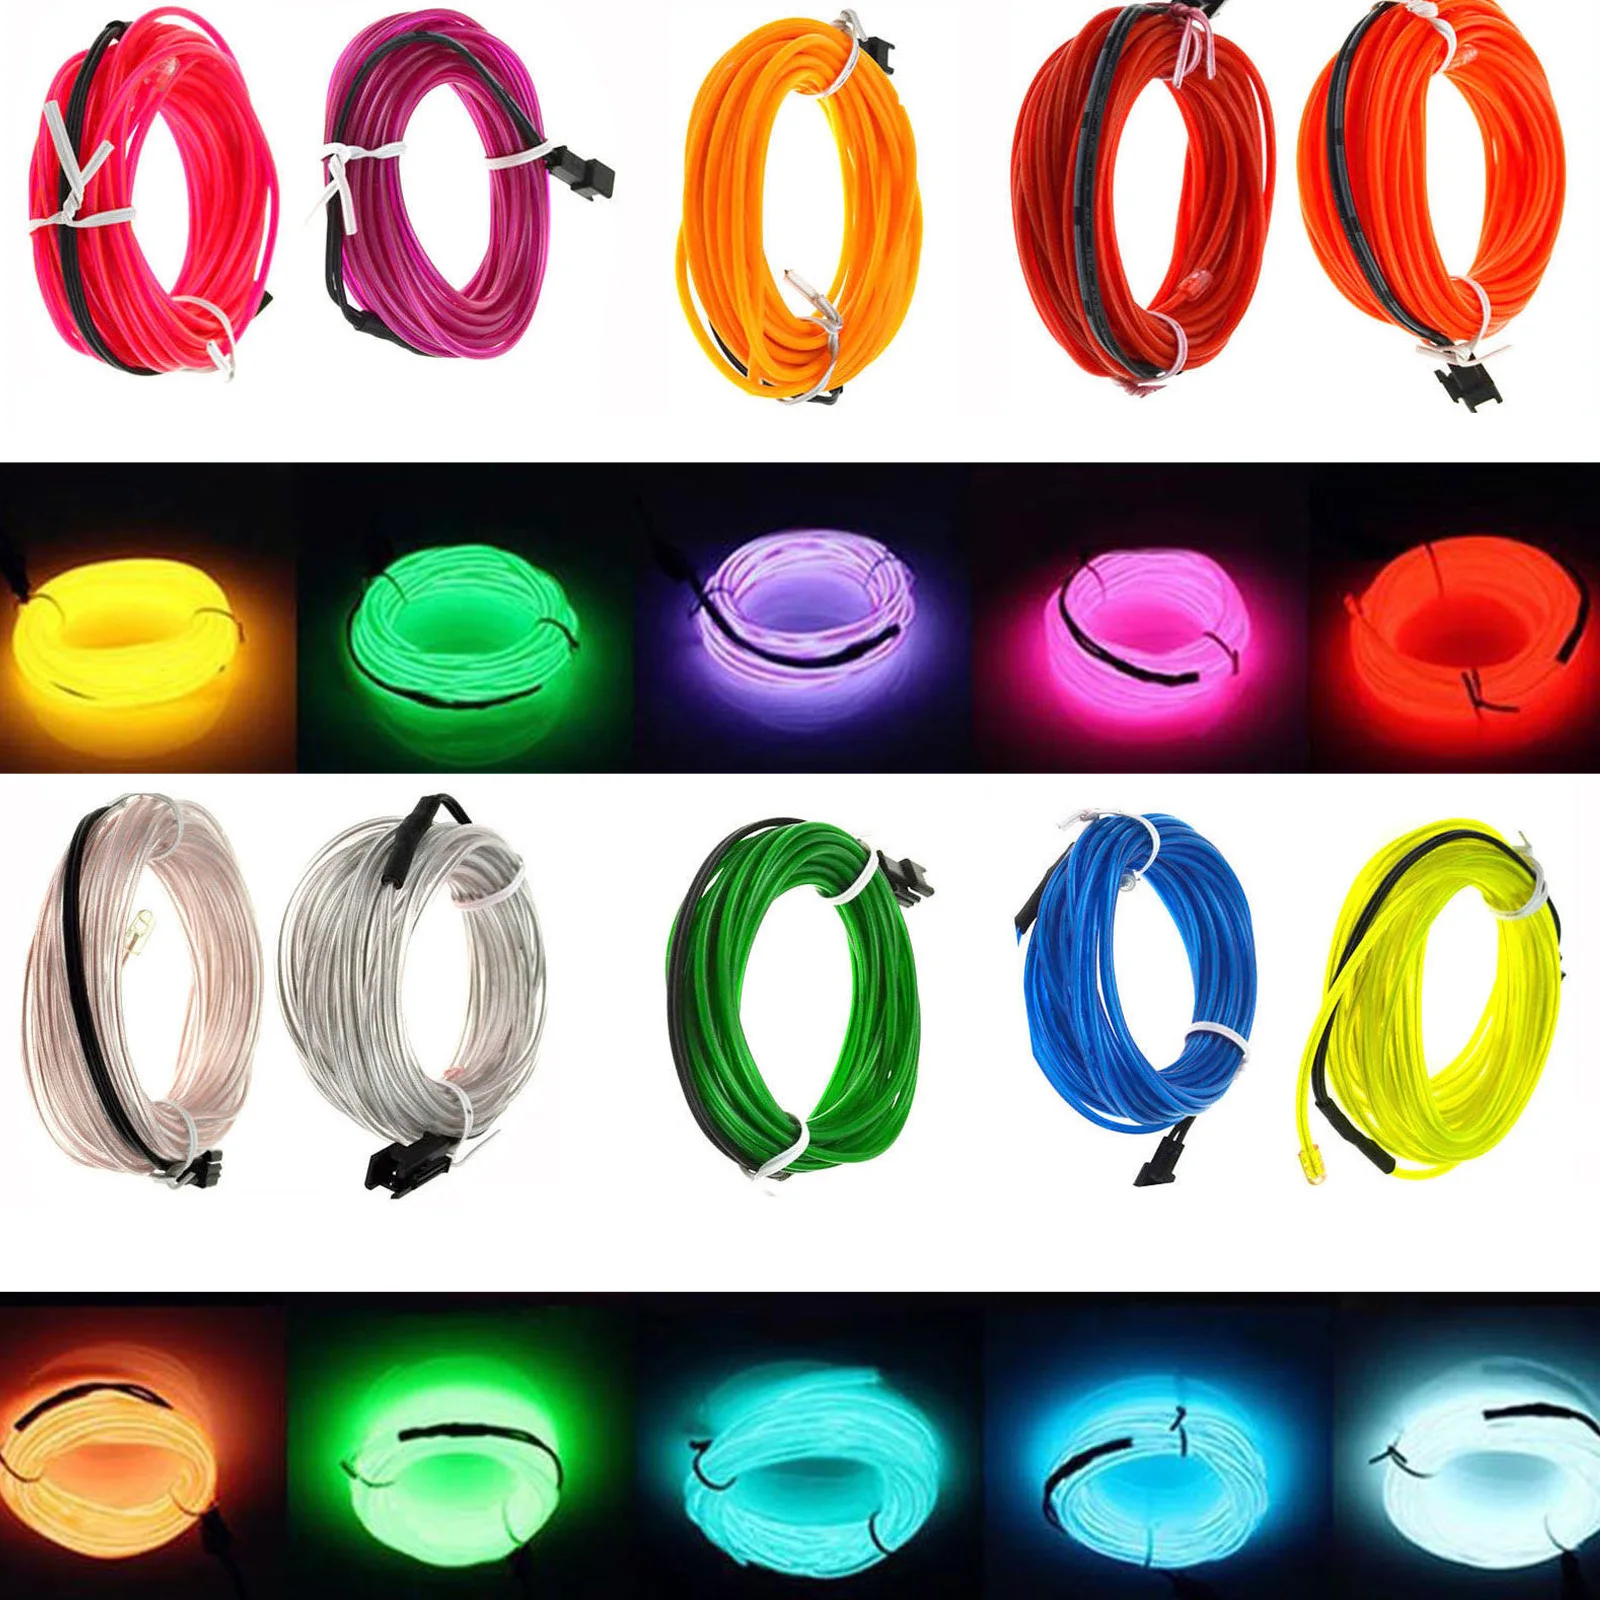 LED EL Wire Neon Glow String Strip Light Rope Controller Car Decor Dance Party 